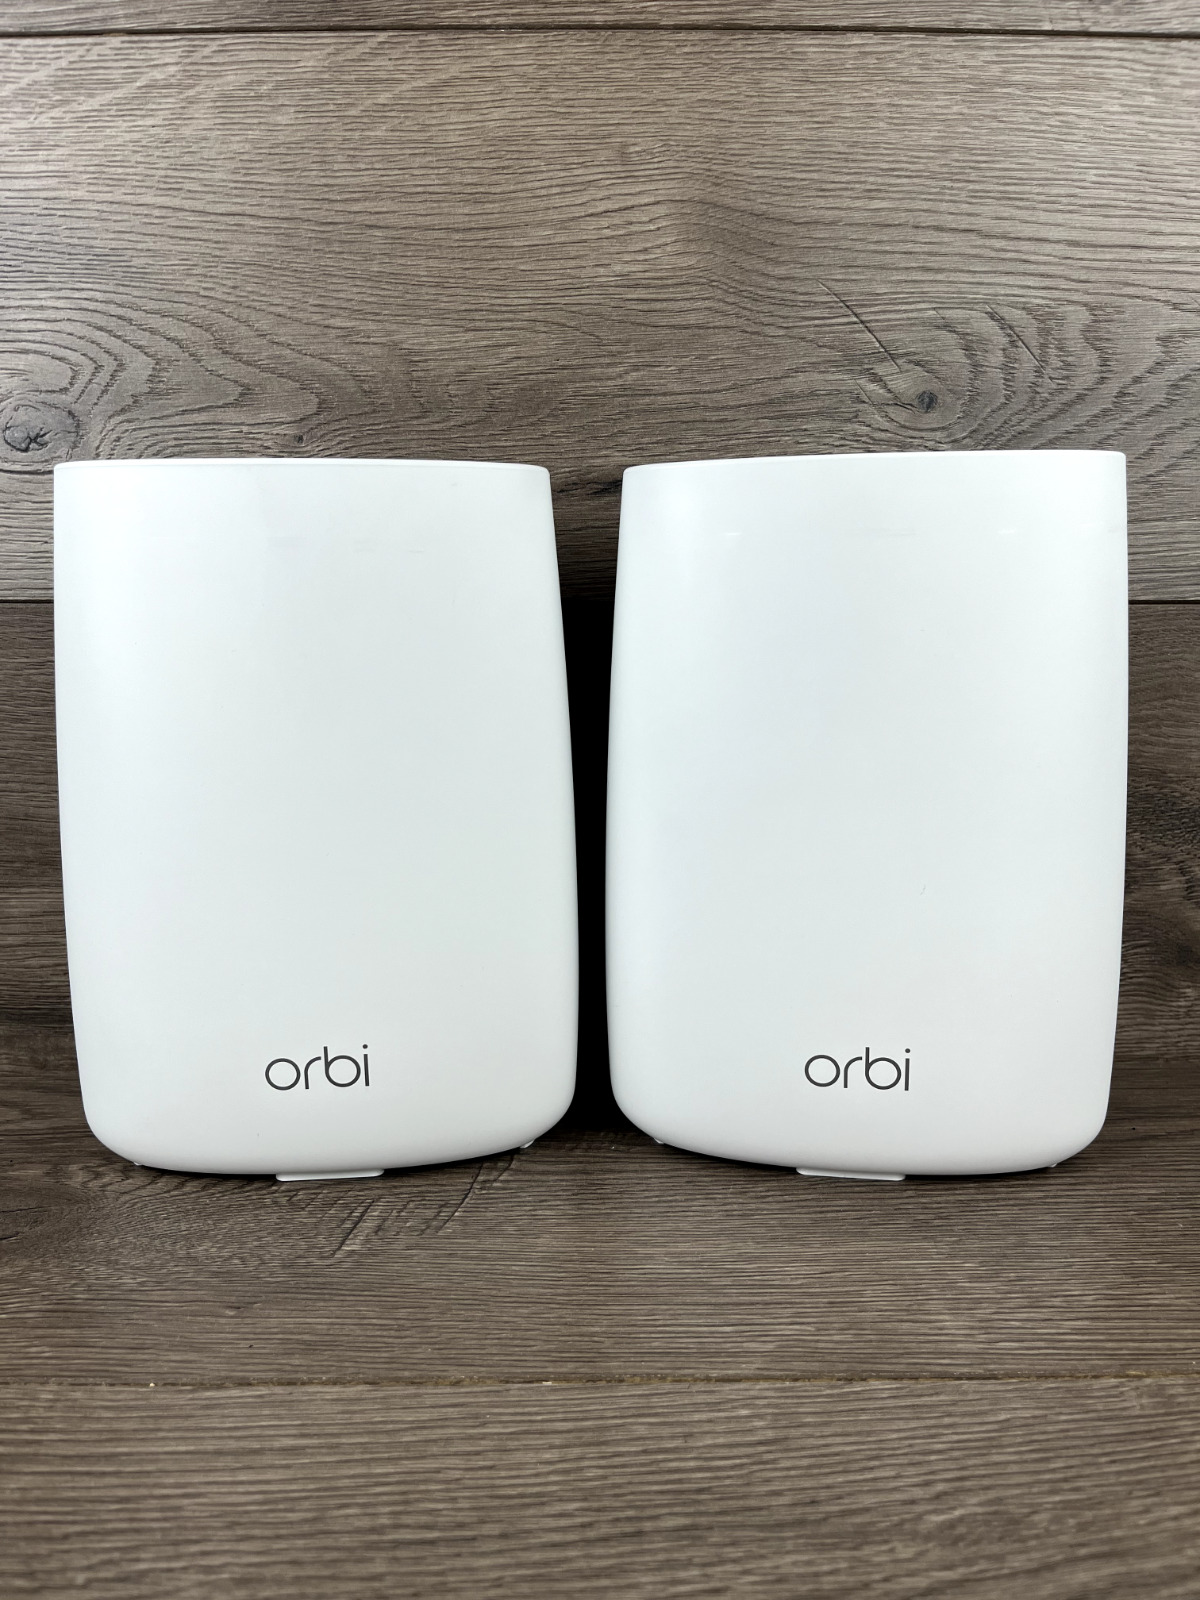 Netgear Orbi AC3000 Tri-Band Wireless Wi-Fi Router Pack of 2 (RBK50-100NAS)